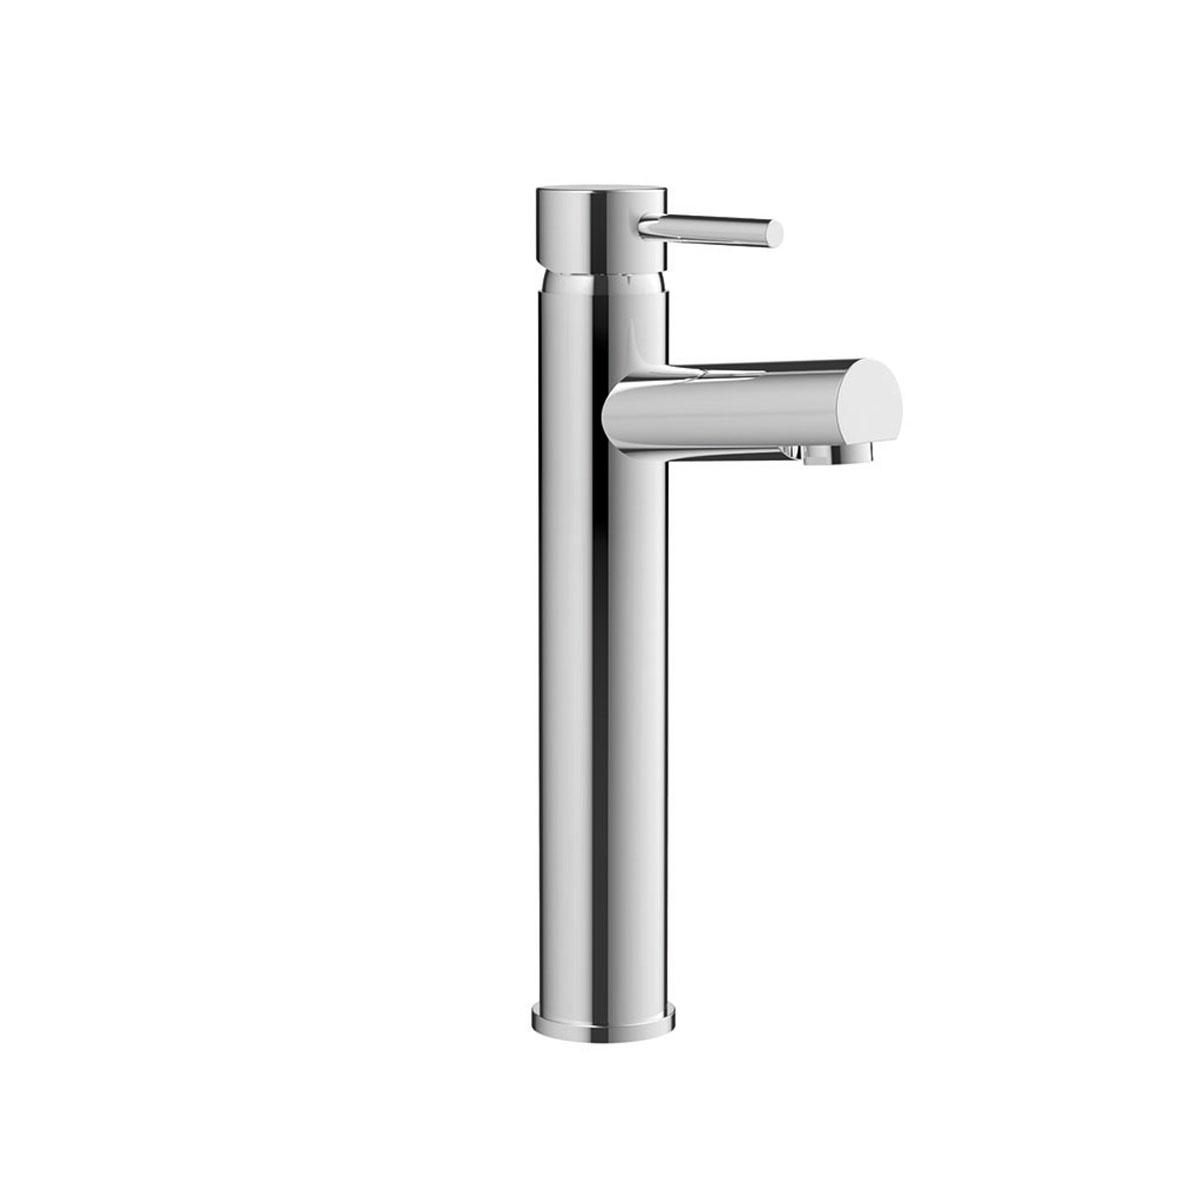 An image of Zico Modern Single Handle Round Tall Body Wash Basin Mixer Faucet No Waste